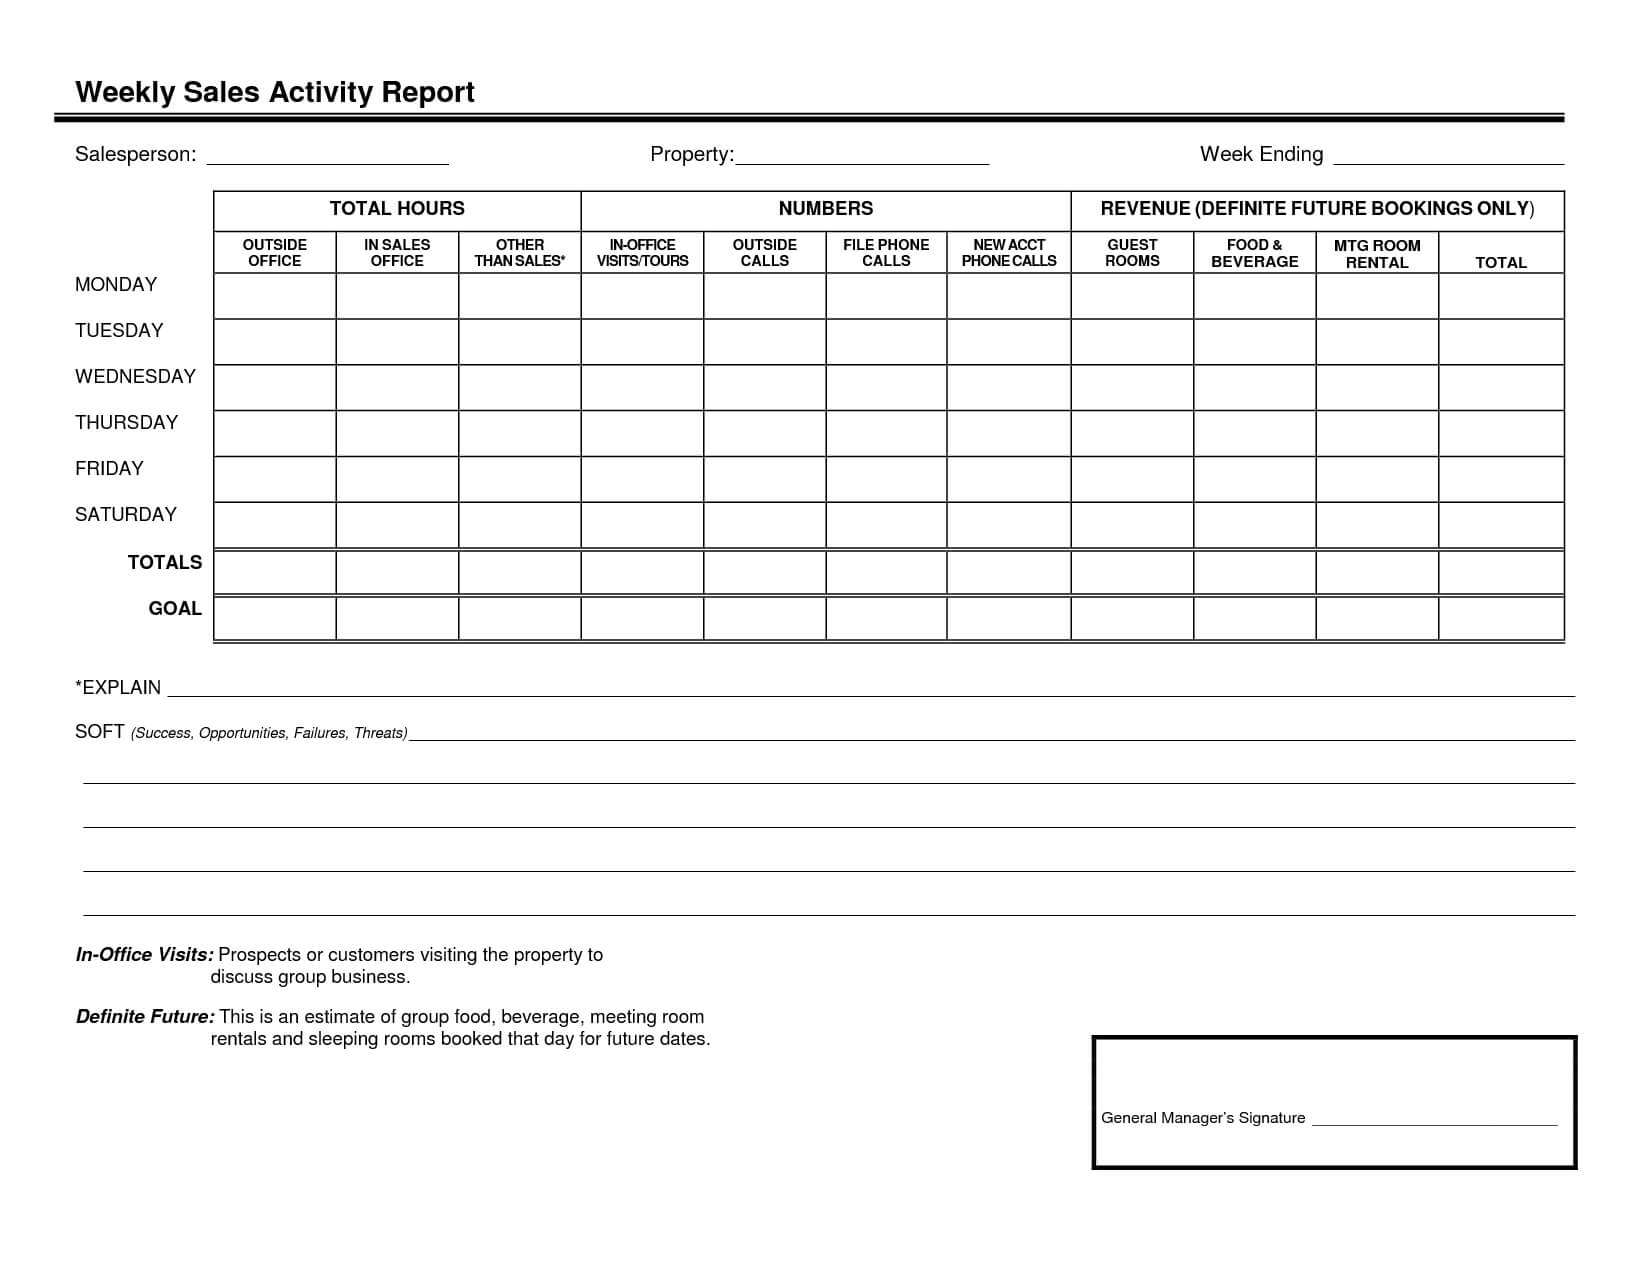 012 Sales Call Reporting Template Weekly Activity Report Regarding Sales Call Reports Templates Free